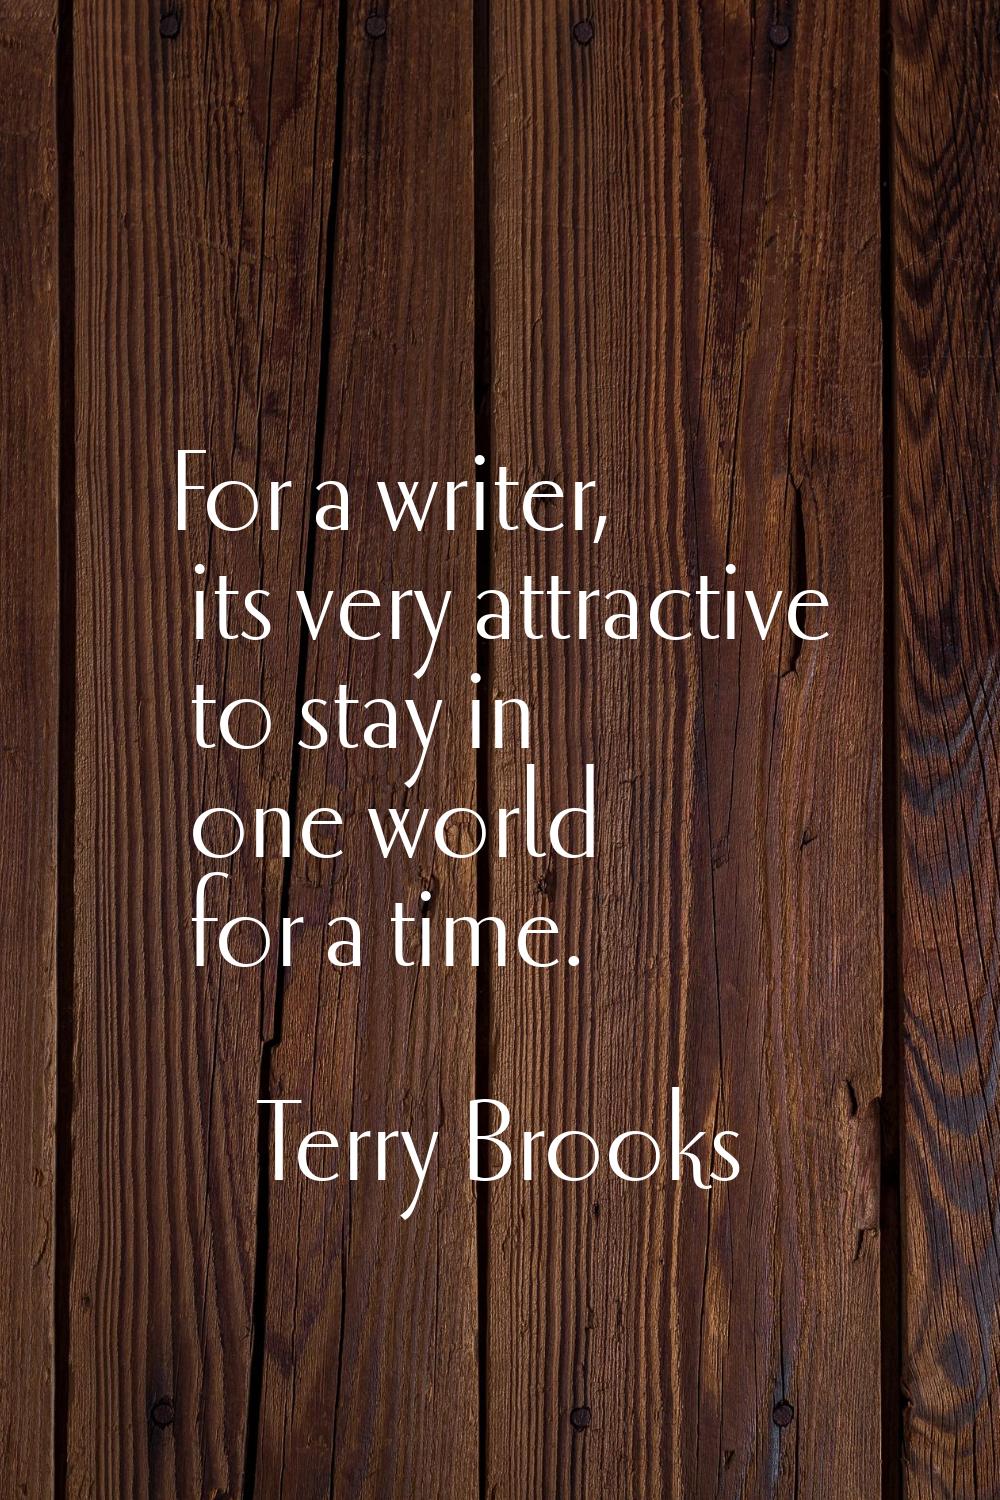 For a writer, its very attractive to stay in one world for a time.